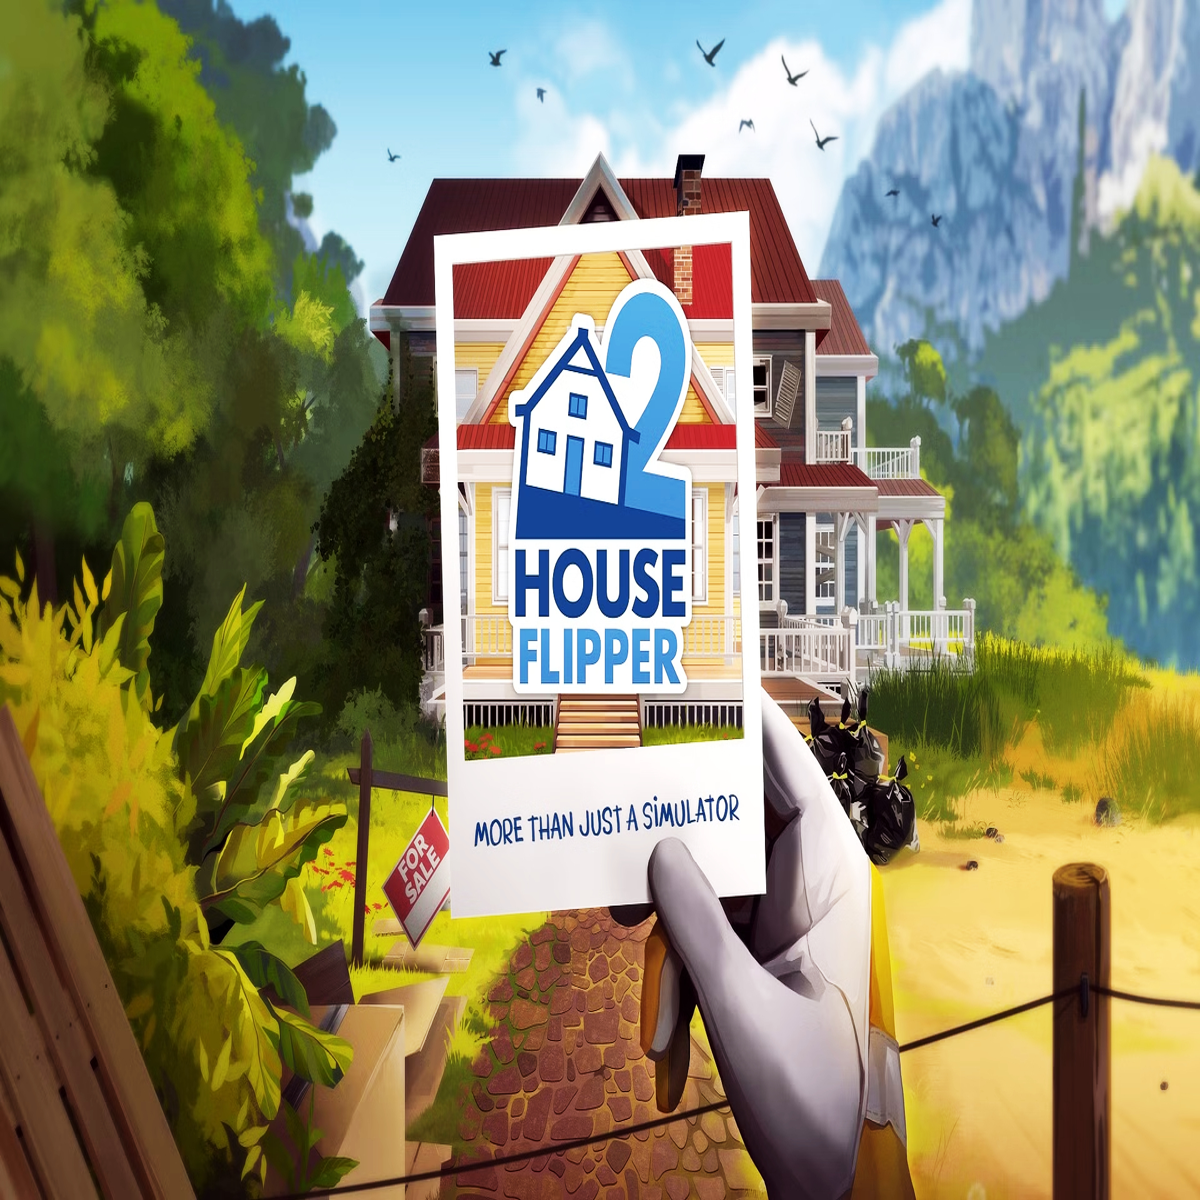 Everything you need to know about House Flipper 2 on its hotly